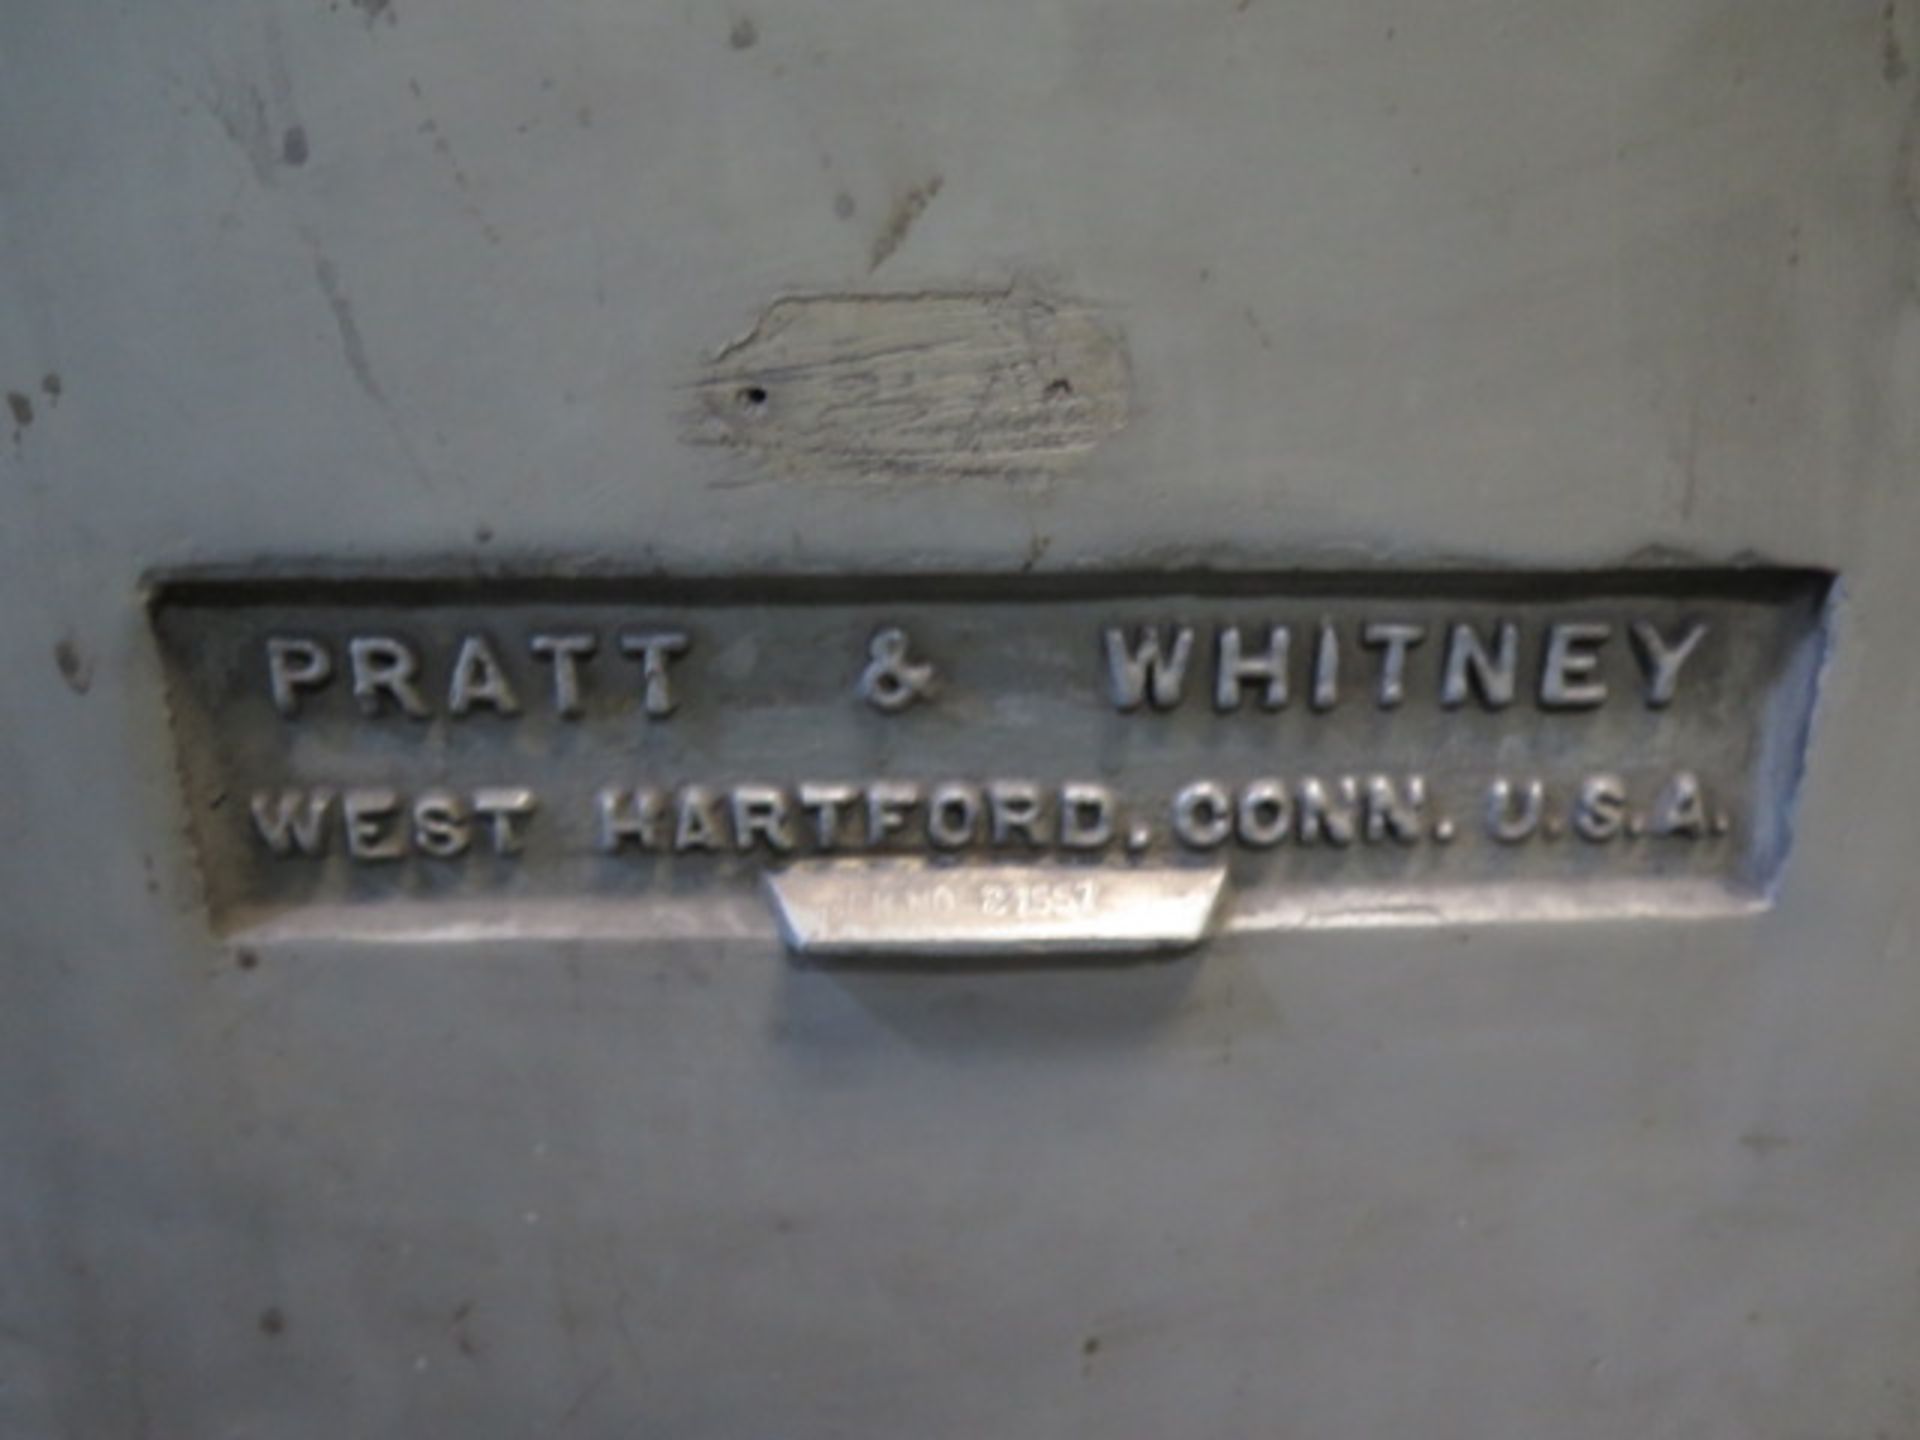 Pratt & Whitney Tool and Cutter Grinder (SOLD AS-IS - NO WARRANTY) - Image 8 of 8